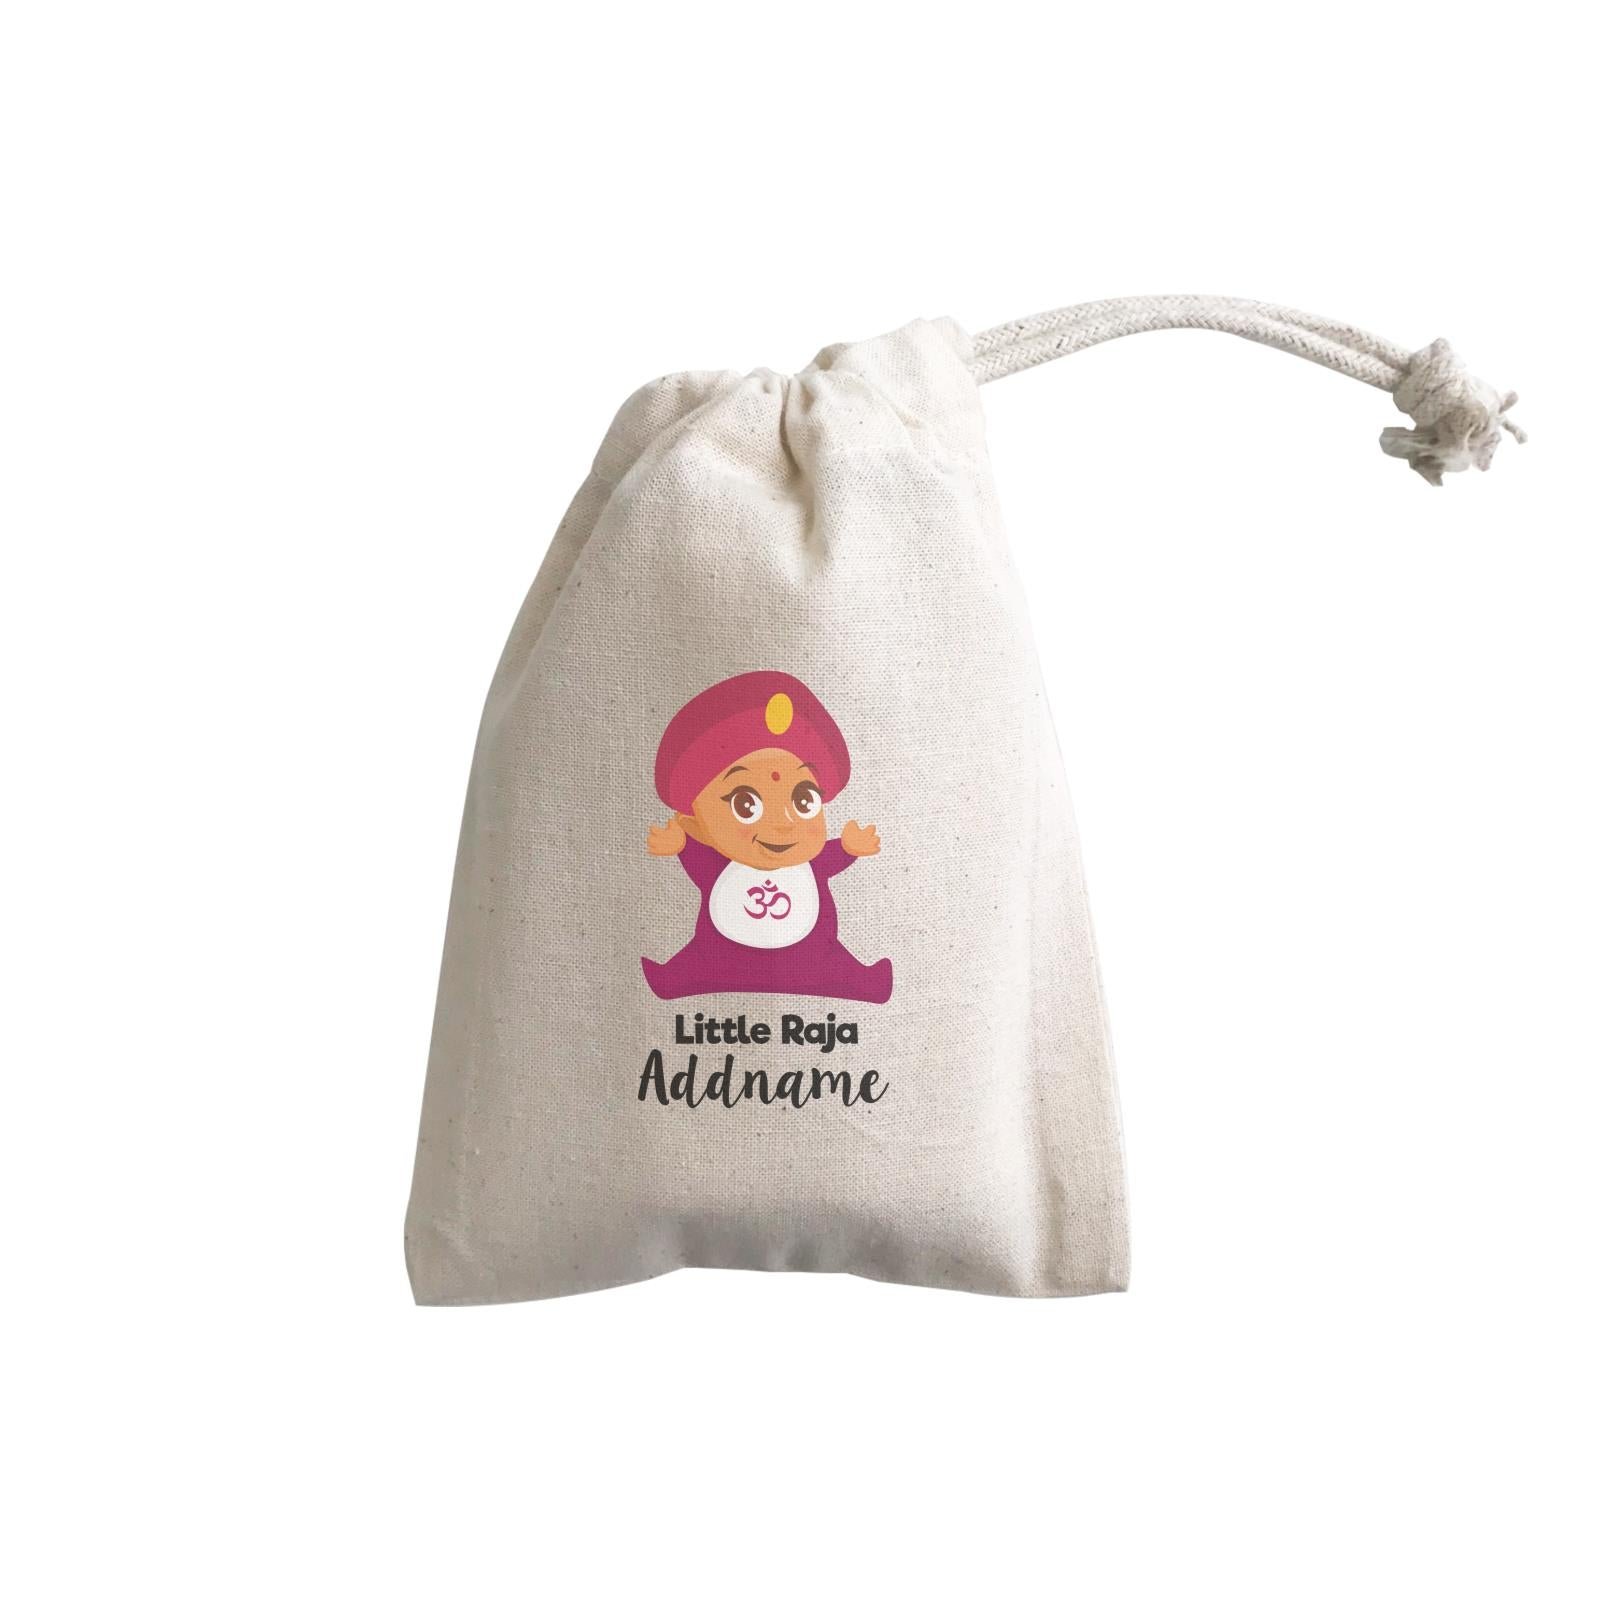 Little Raja Baby Addname GP Gift Pouch